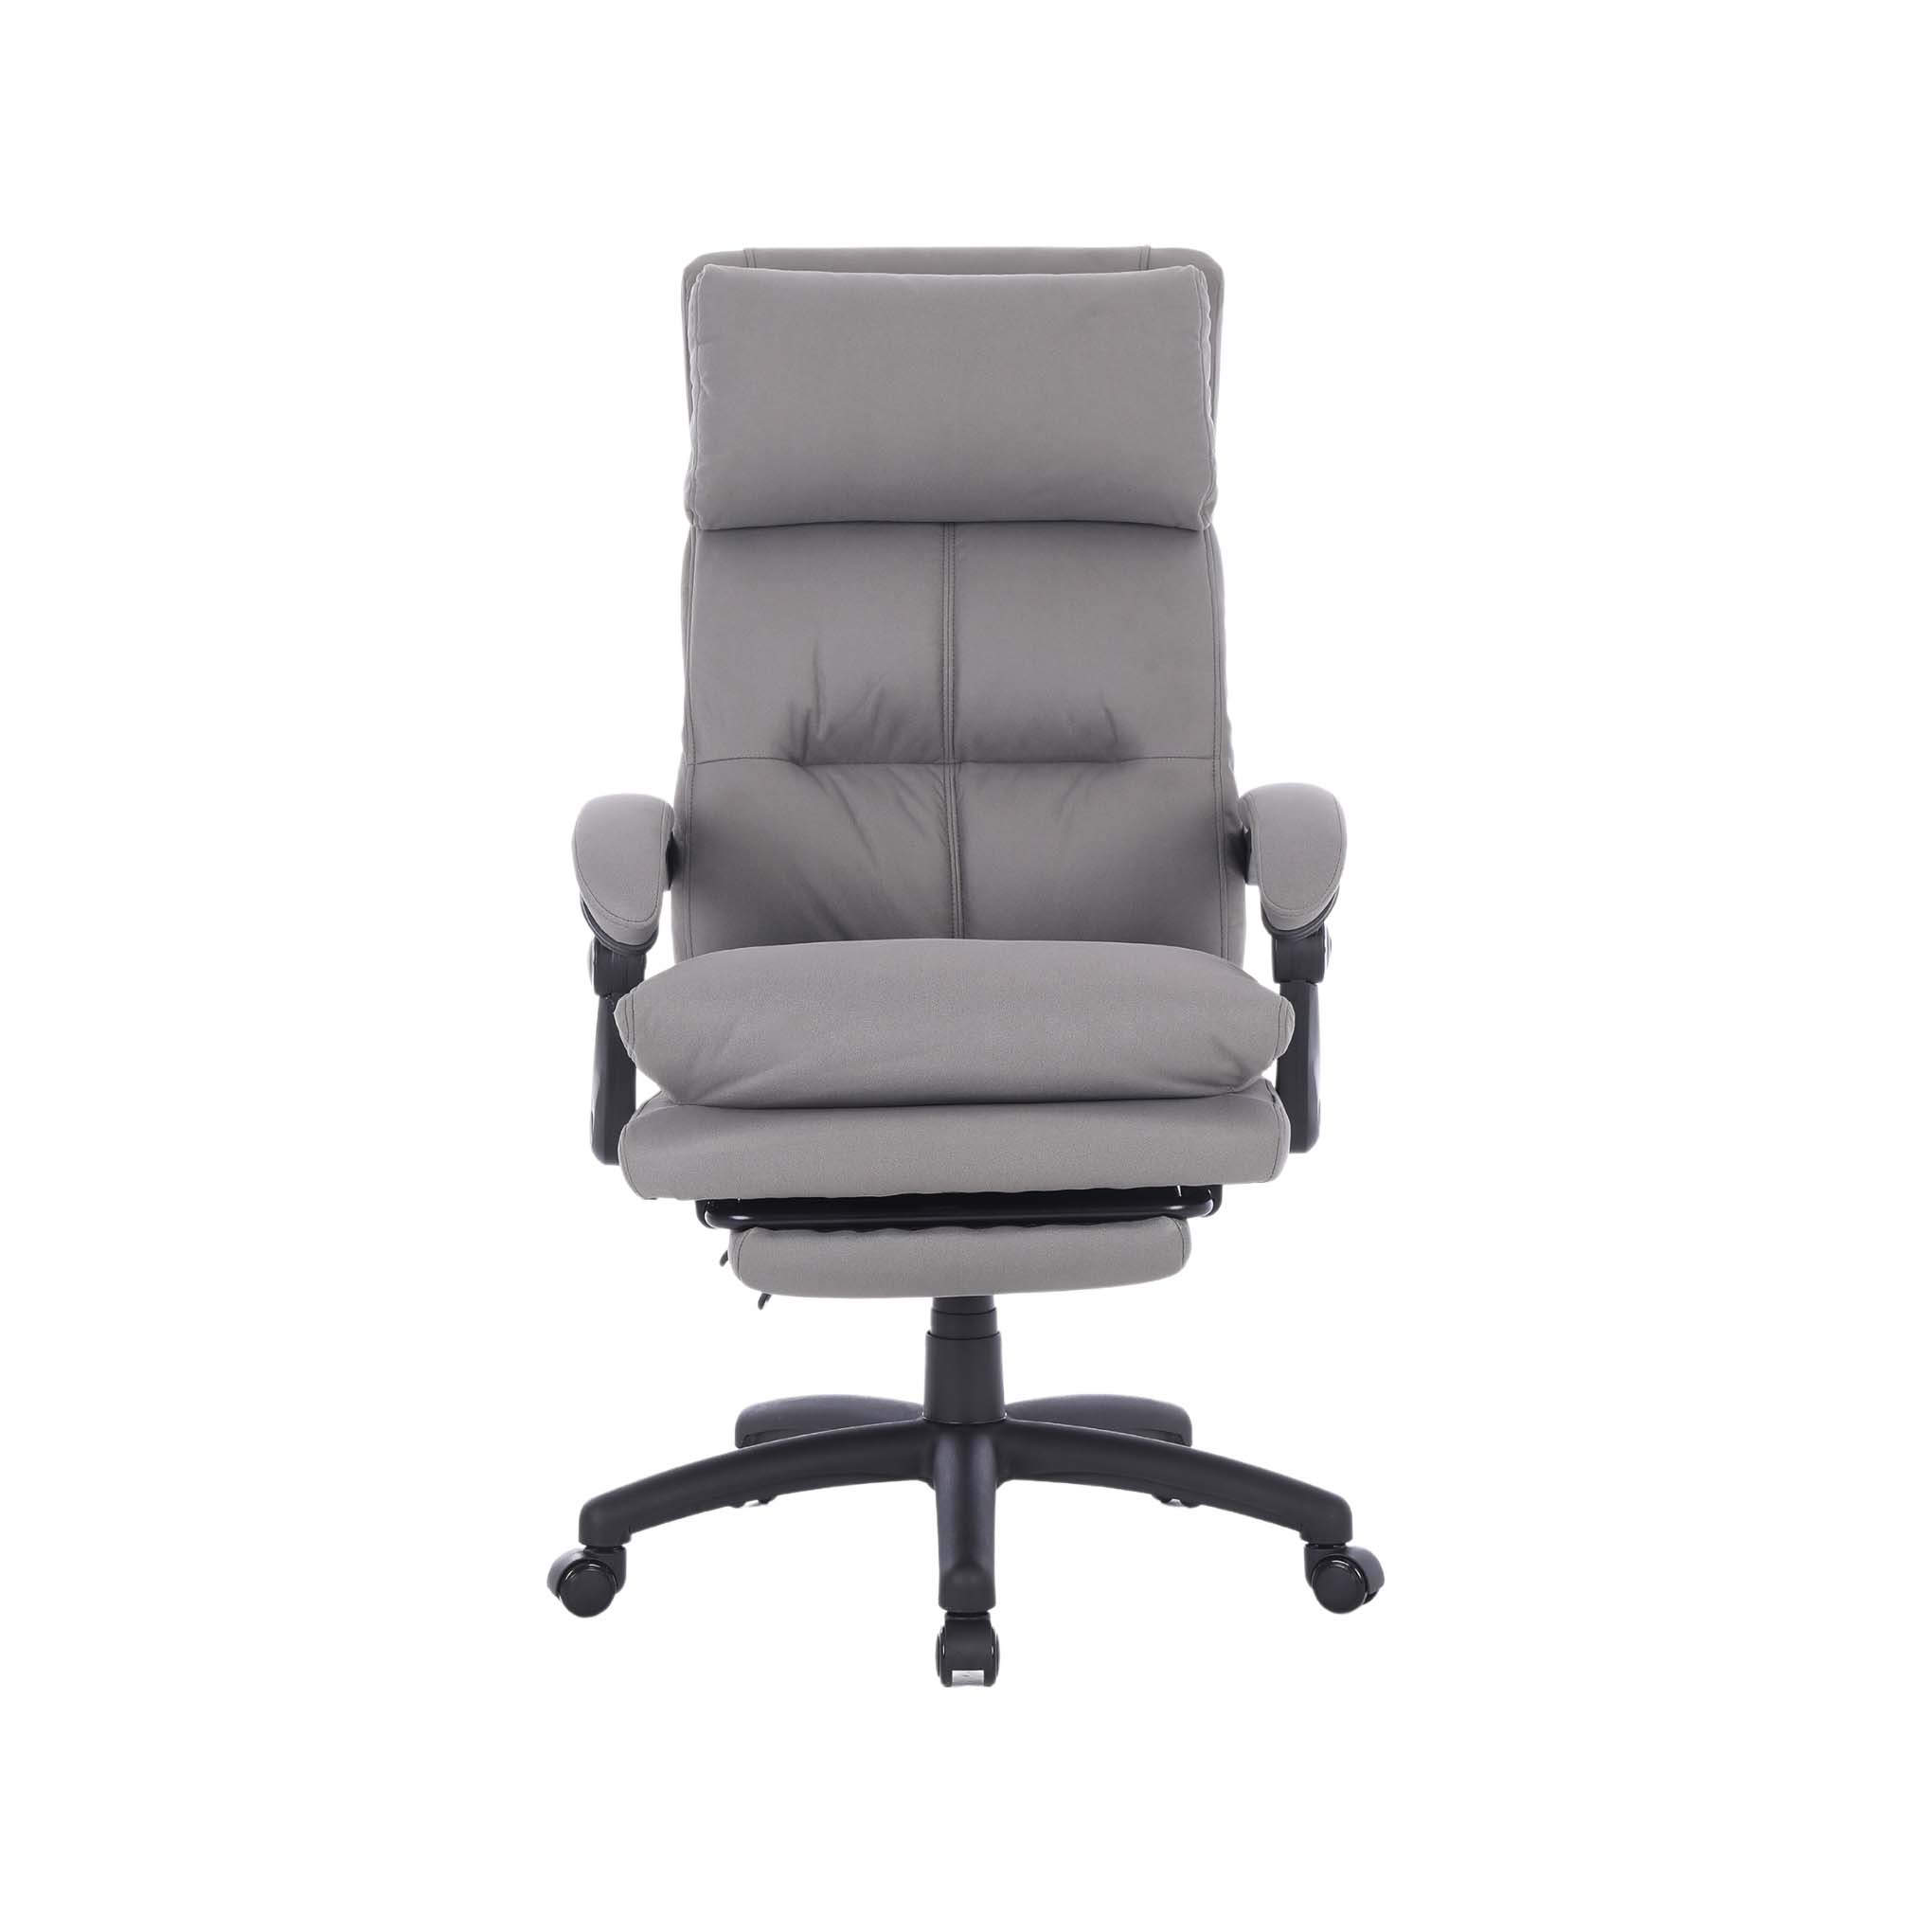 Lotta High Back Office Chair with Footrest